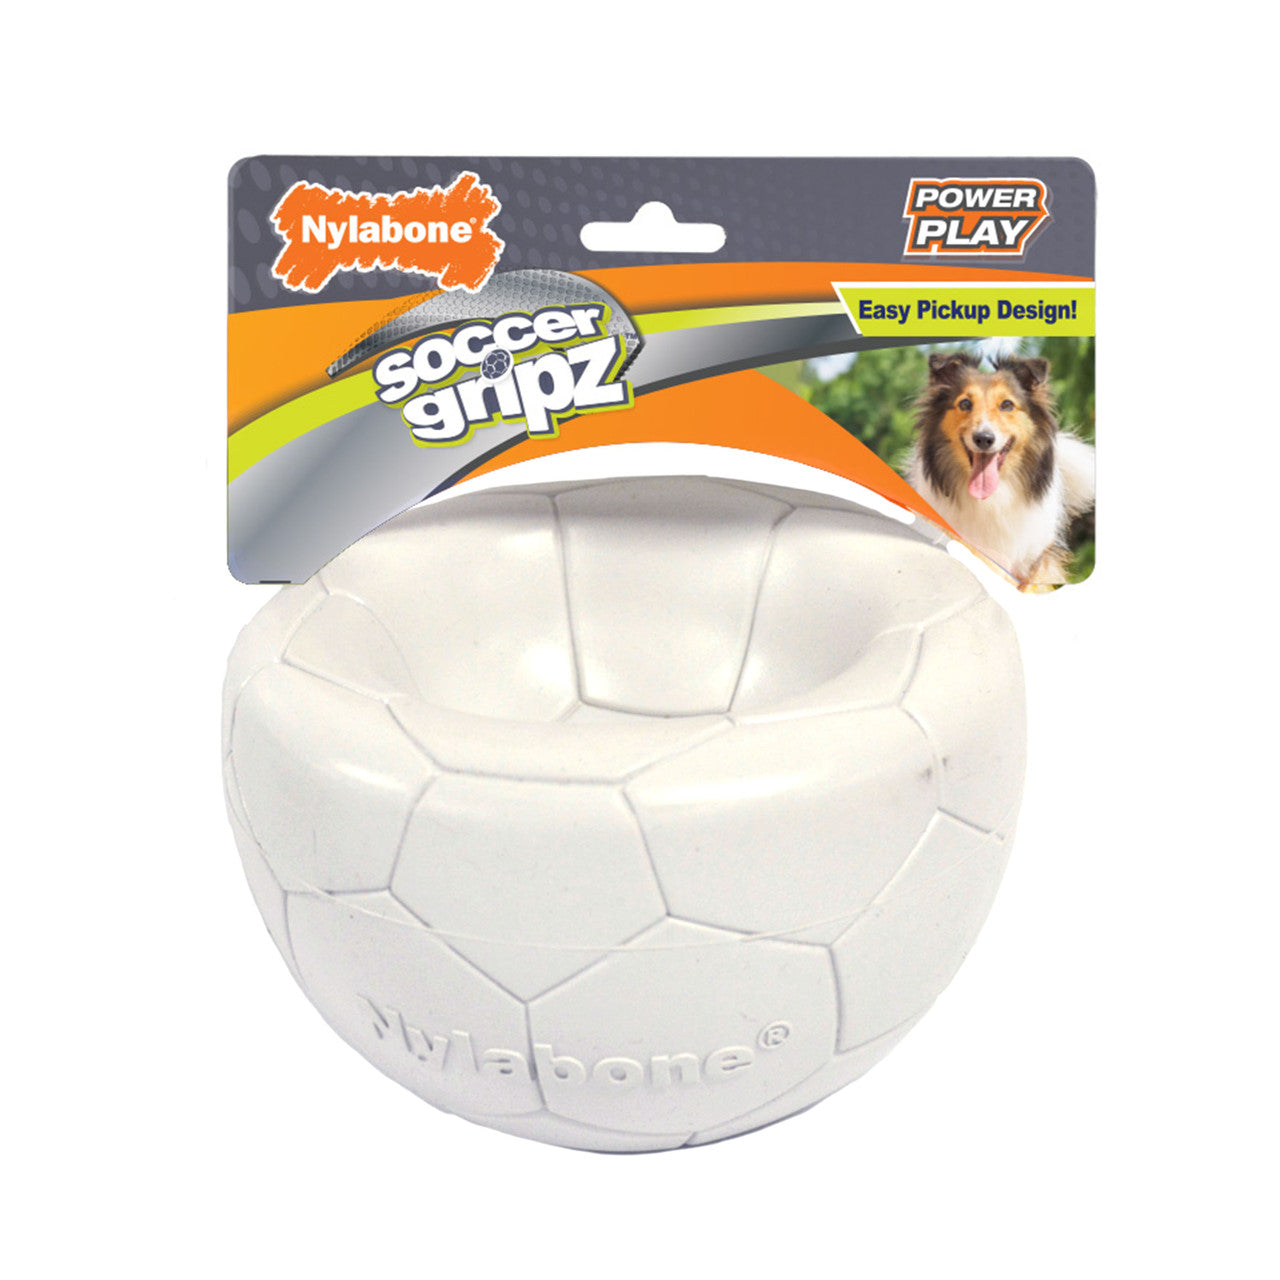 Nylabone Power Play Gripz Dog Soccer Ball Toy with Easy Pickup Design Medium (1 Count)